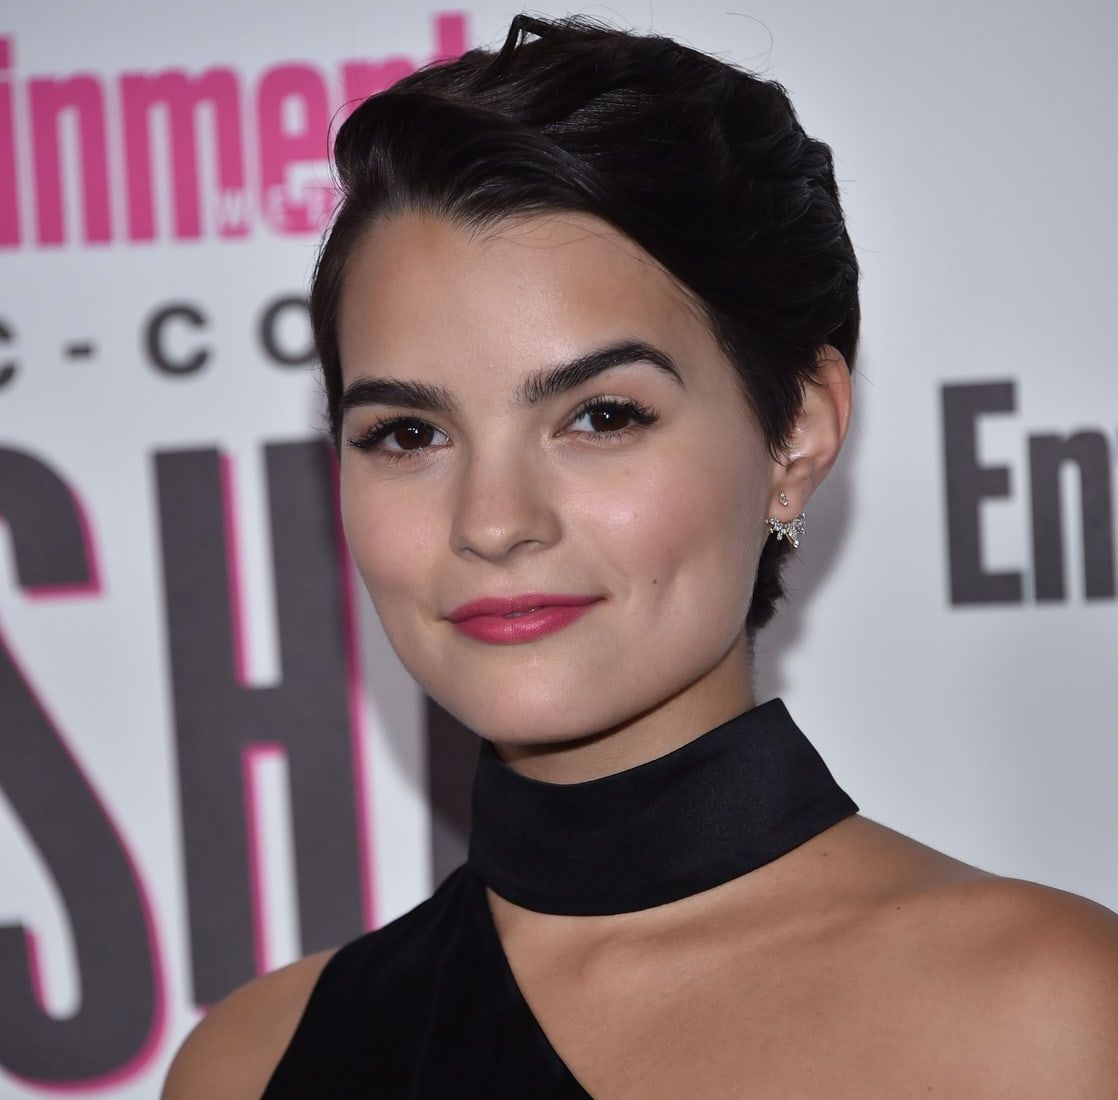 What you don't know about Brianna Hildebrand.